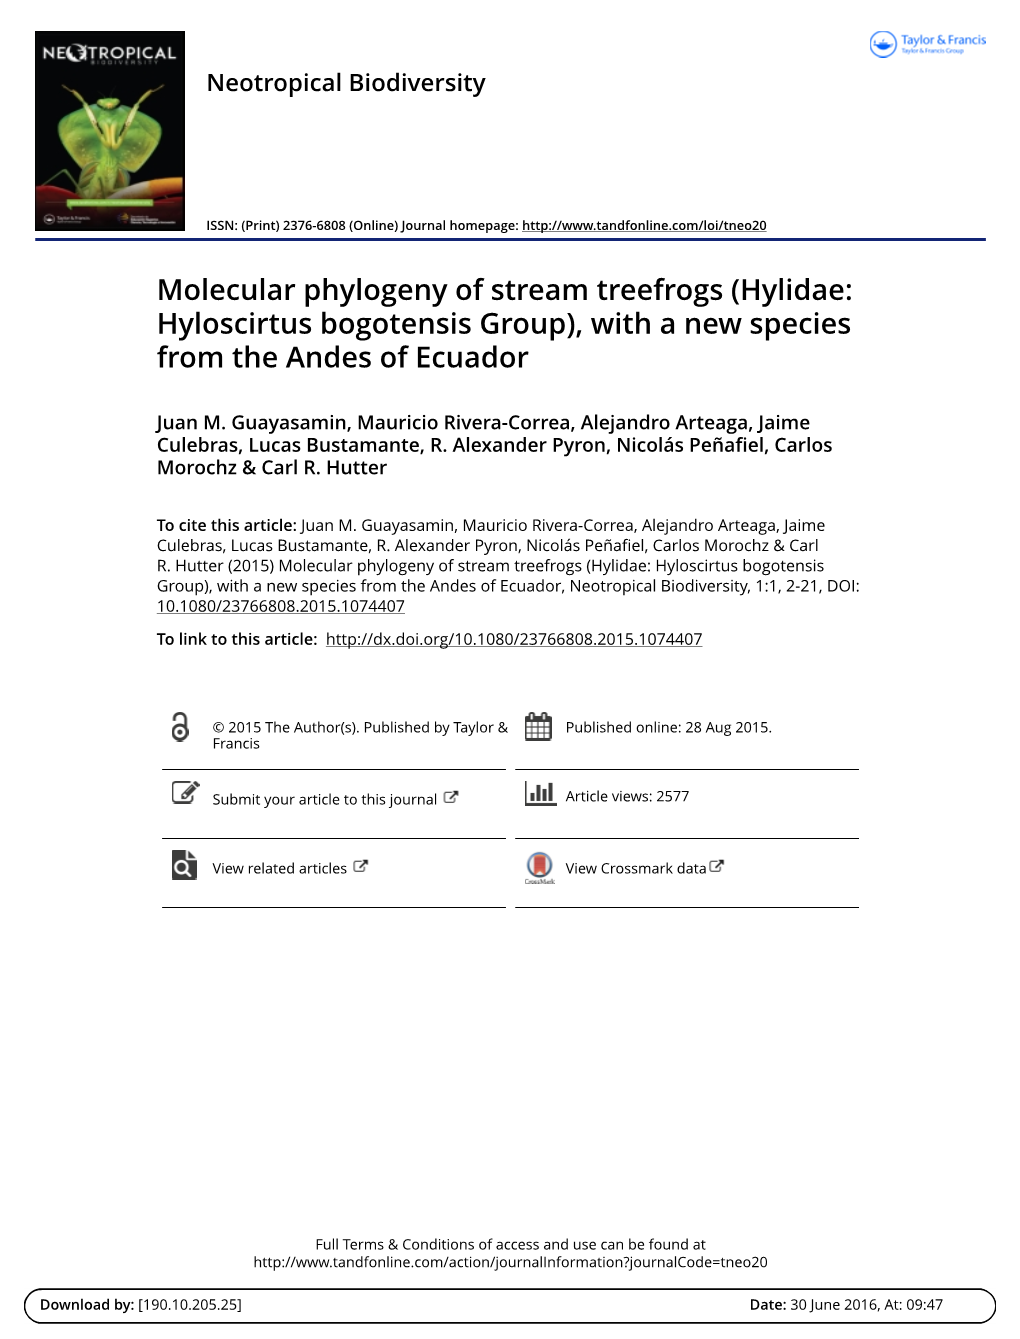 (Hylidae: Hyloscirtus Bogotensis Group), with a New Species from the Andes of Ecuador